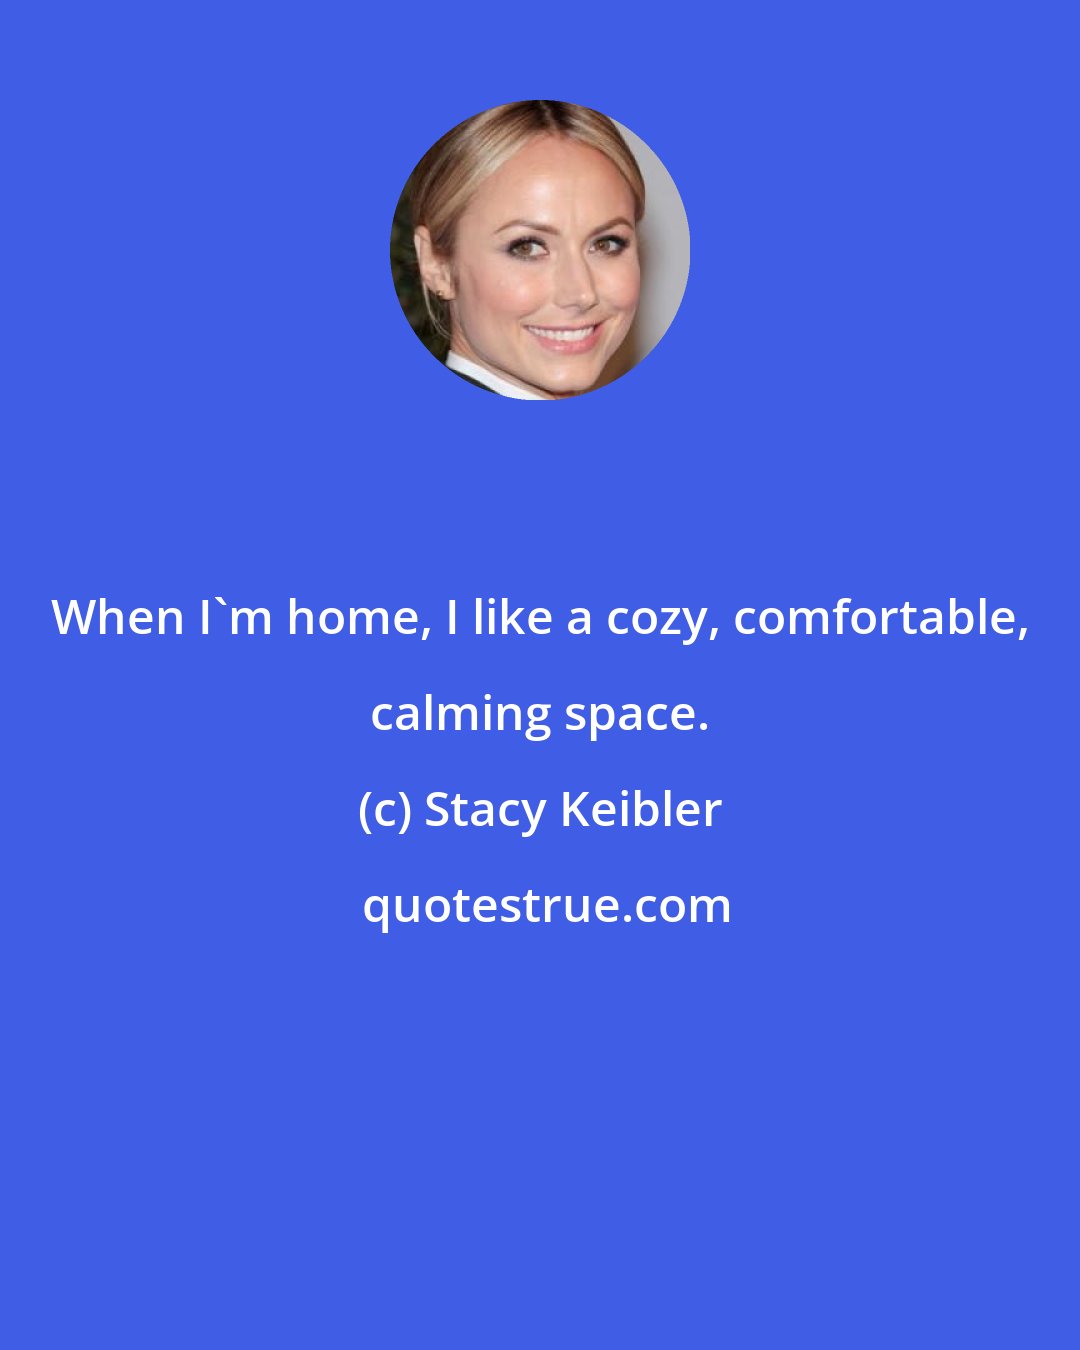 Stacy Keibler: When I'm home, I like a cozy, comfortable, calming space.